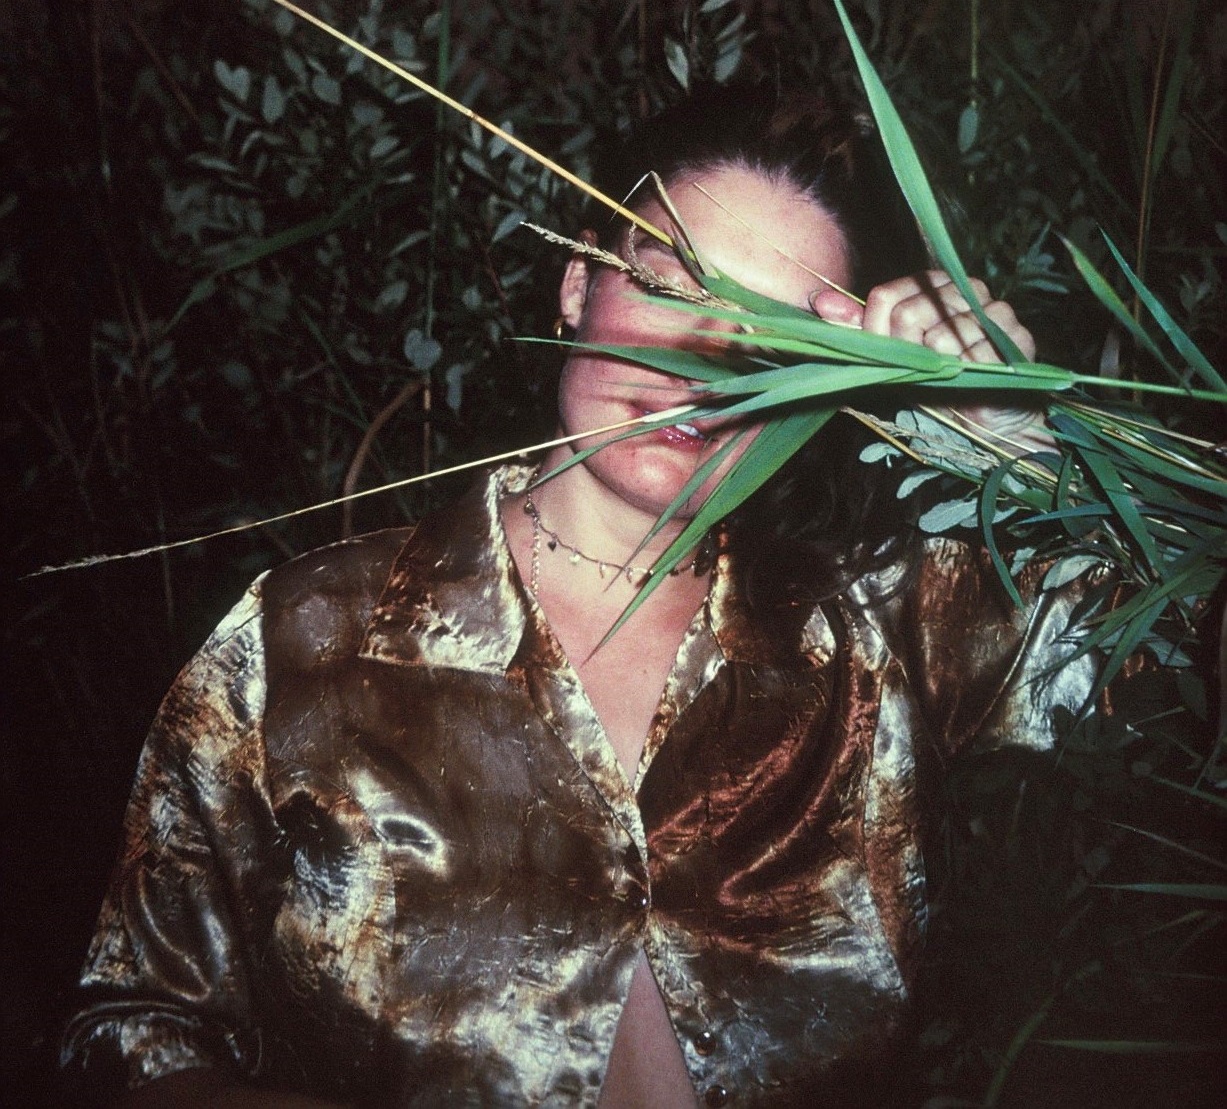 A dance artist in a shiny brown shirt holds plant branches and leaves in front of their face. There are more plants behind them.